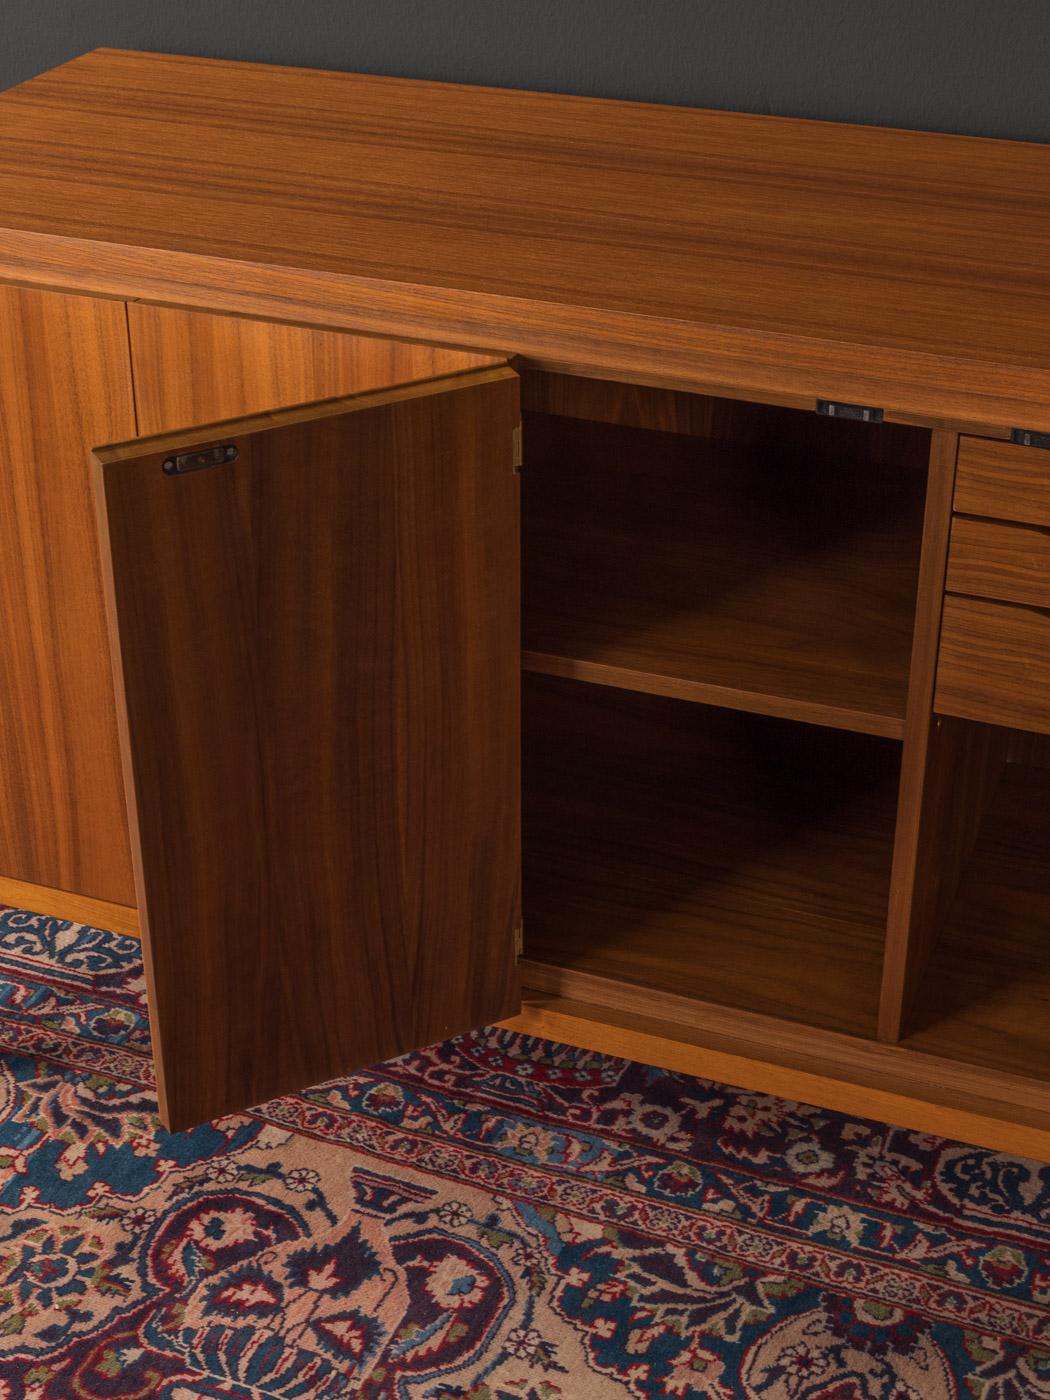 Wk Möbel Sideboard from the 1950s Designed by Paul McCobb, Made in Germany 2